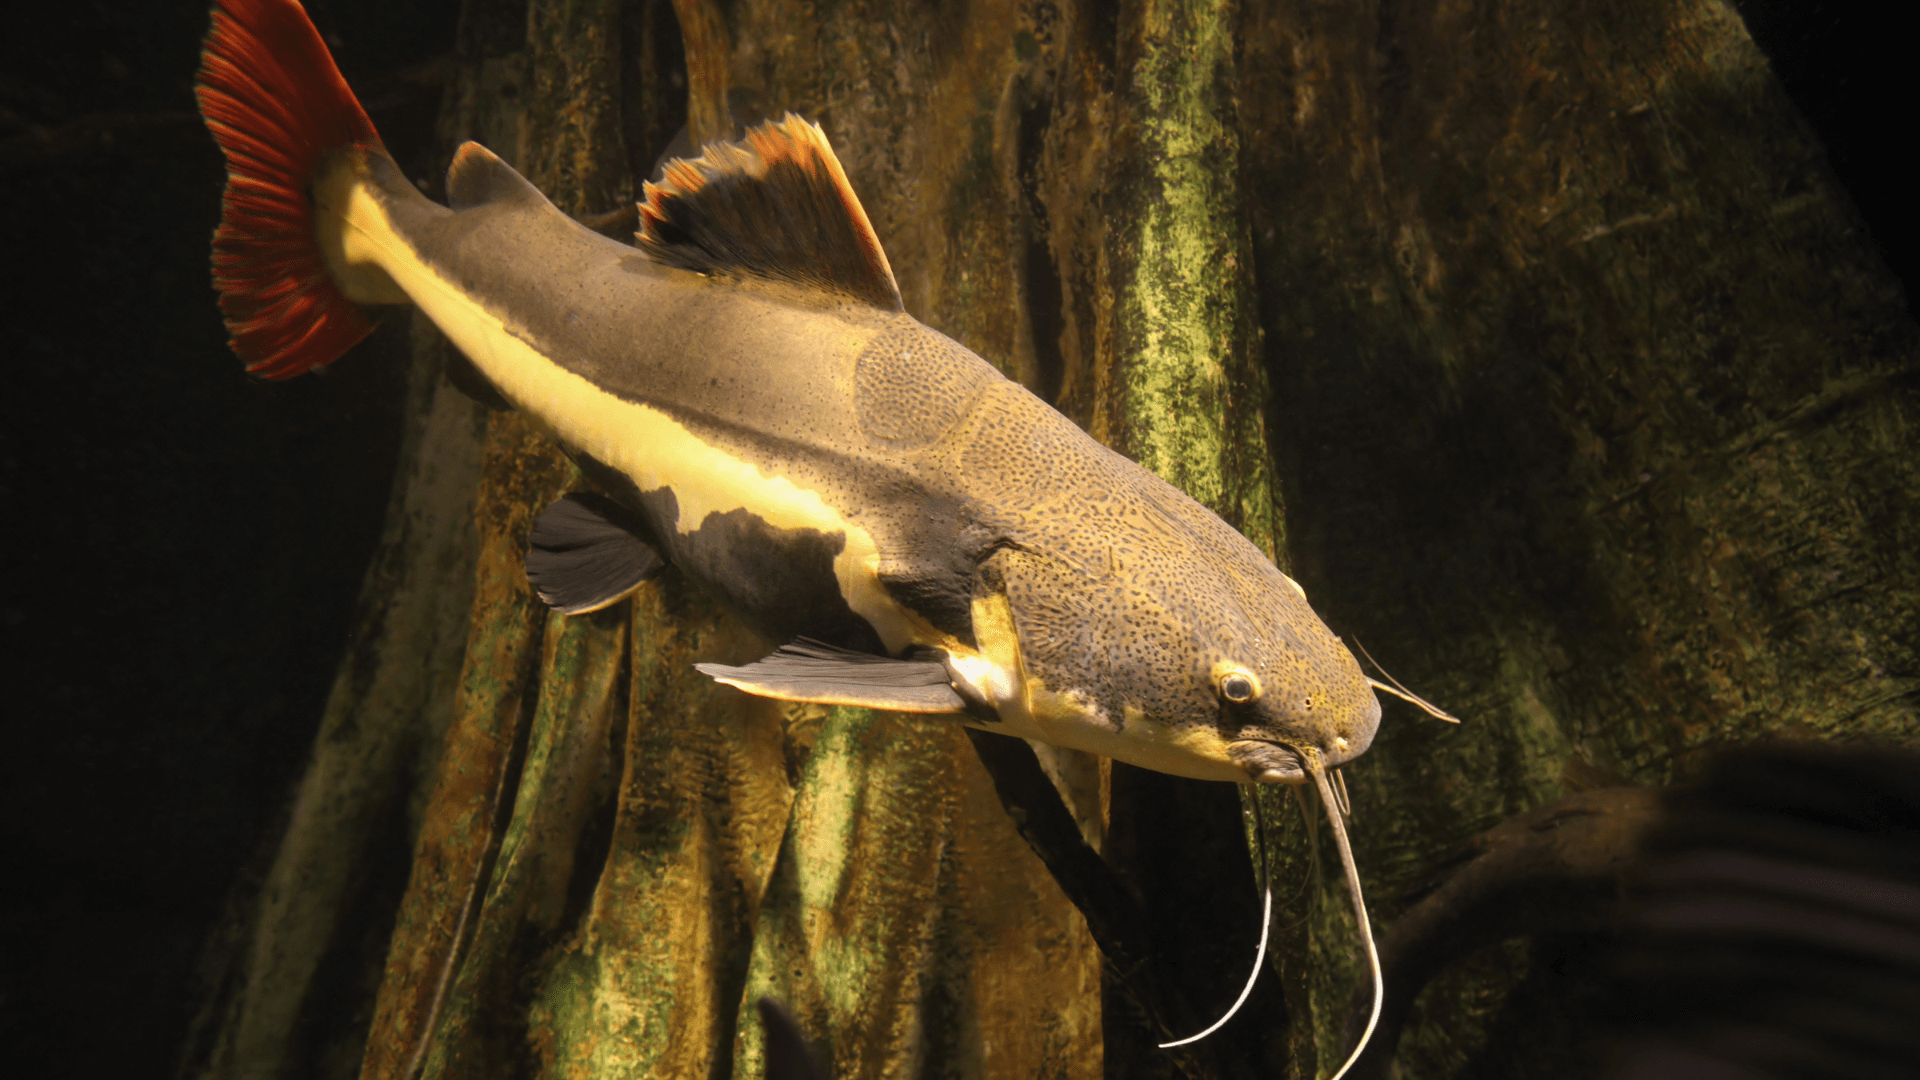 A photo of Redtail catfish